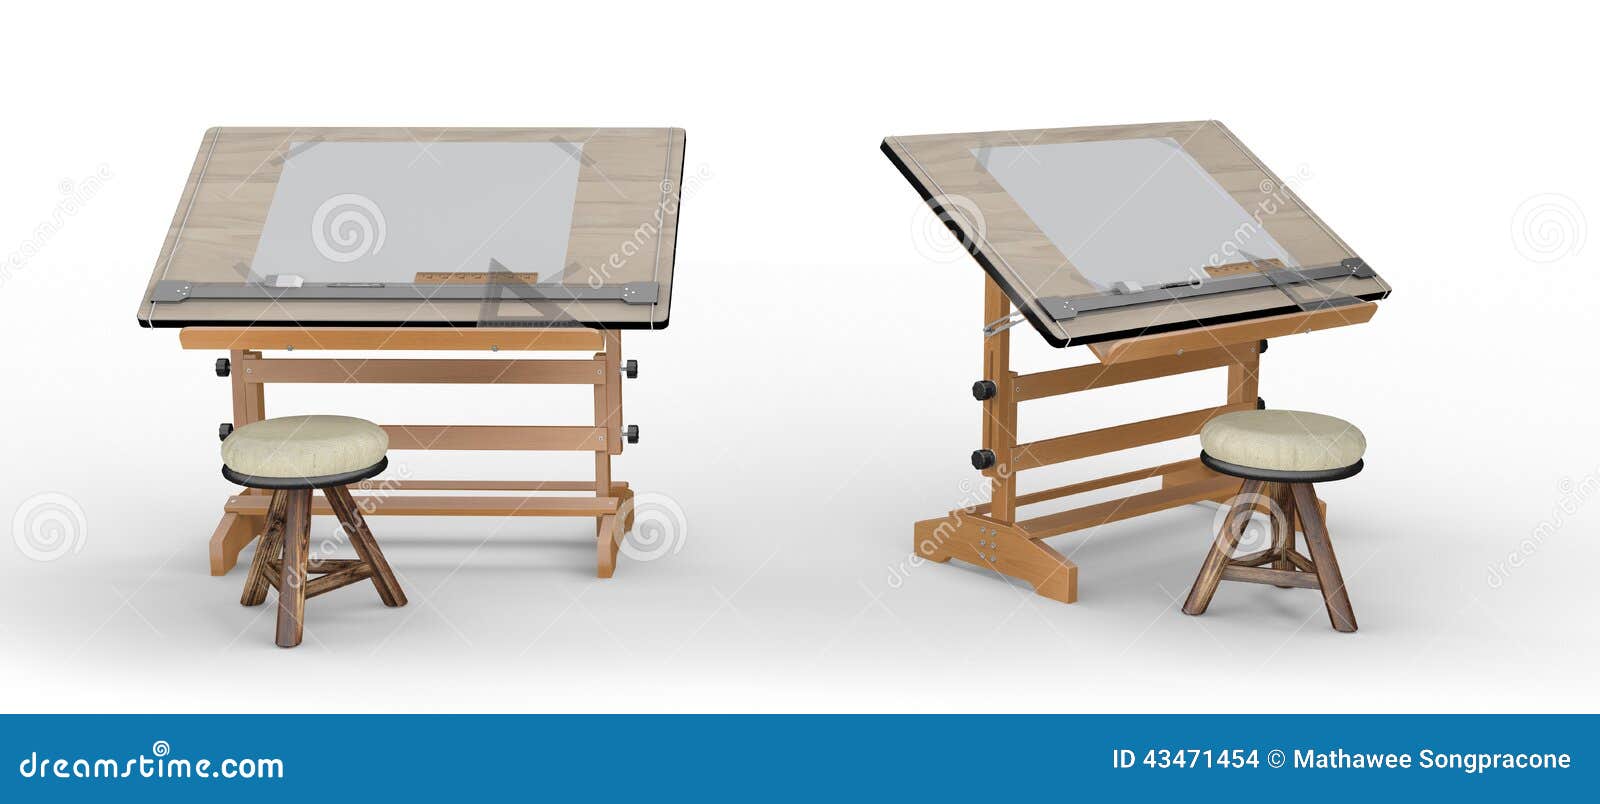 New Wooden Drawing Table With Tools And Stool Clipping Path I